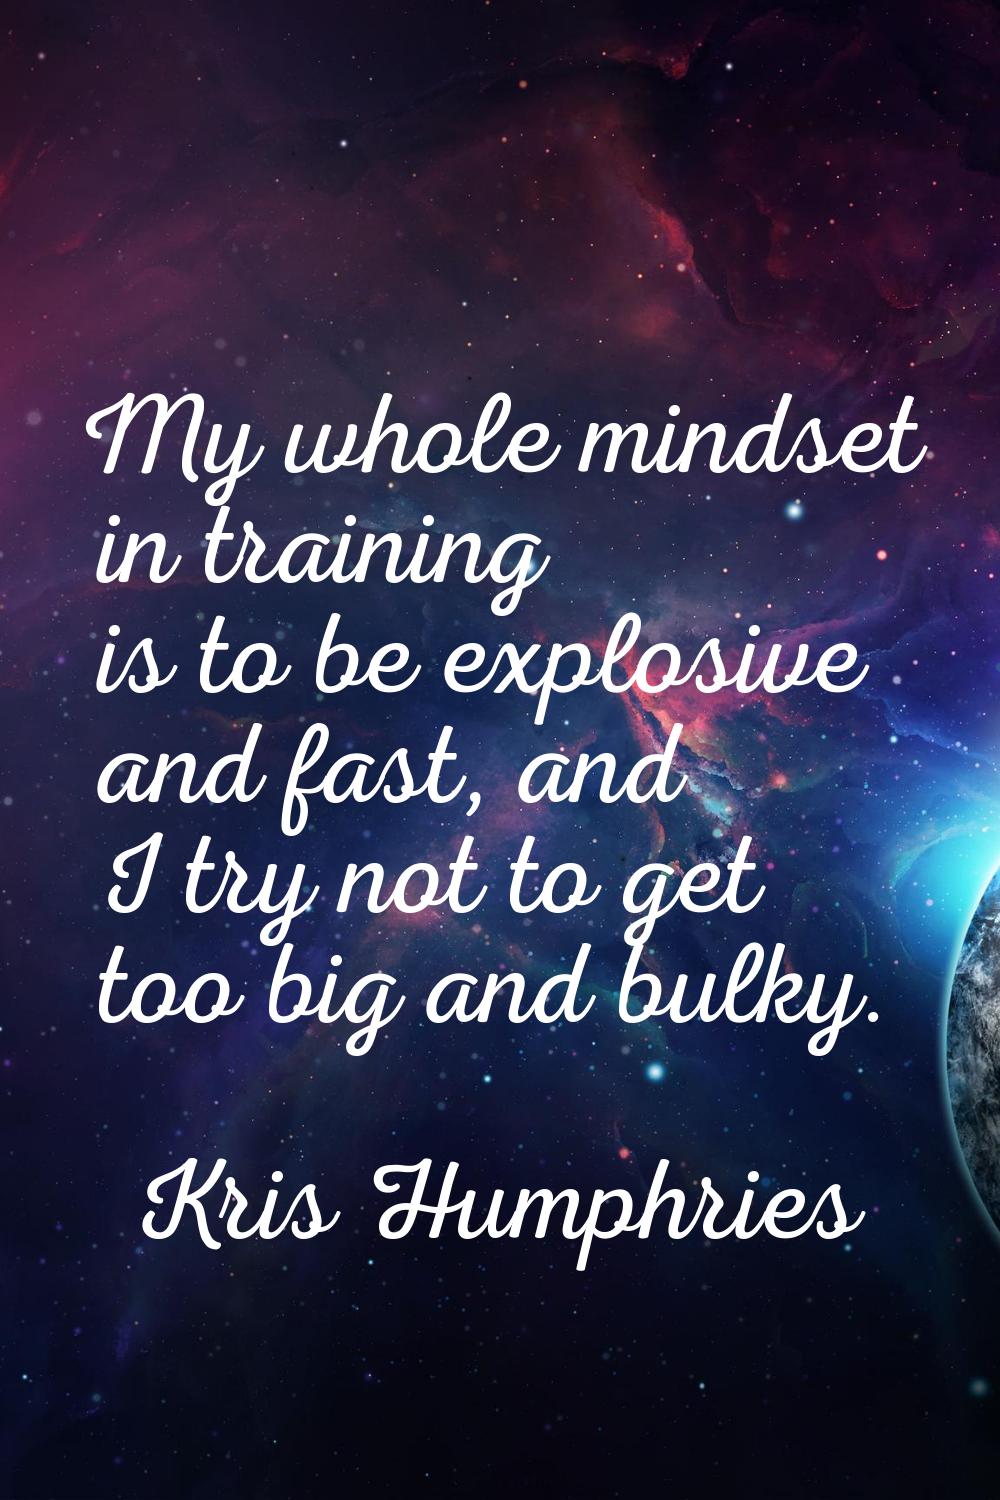 My whole mindset in training is to be explosive and fast, and I try not to get too big and bulky.